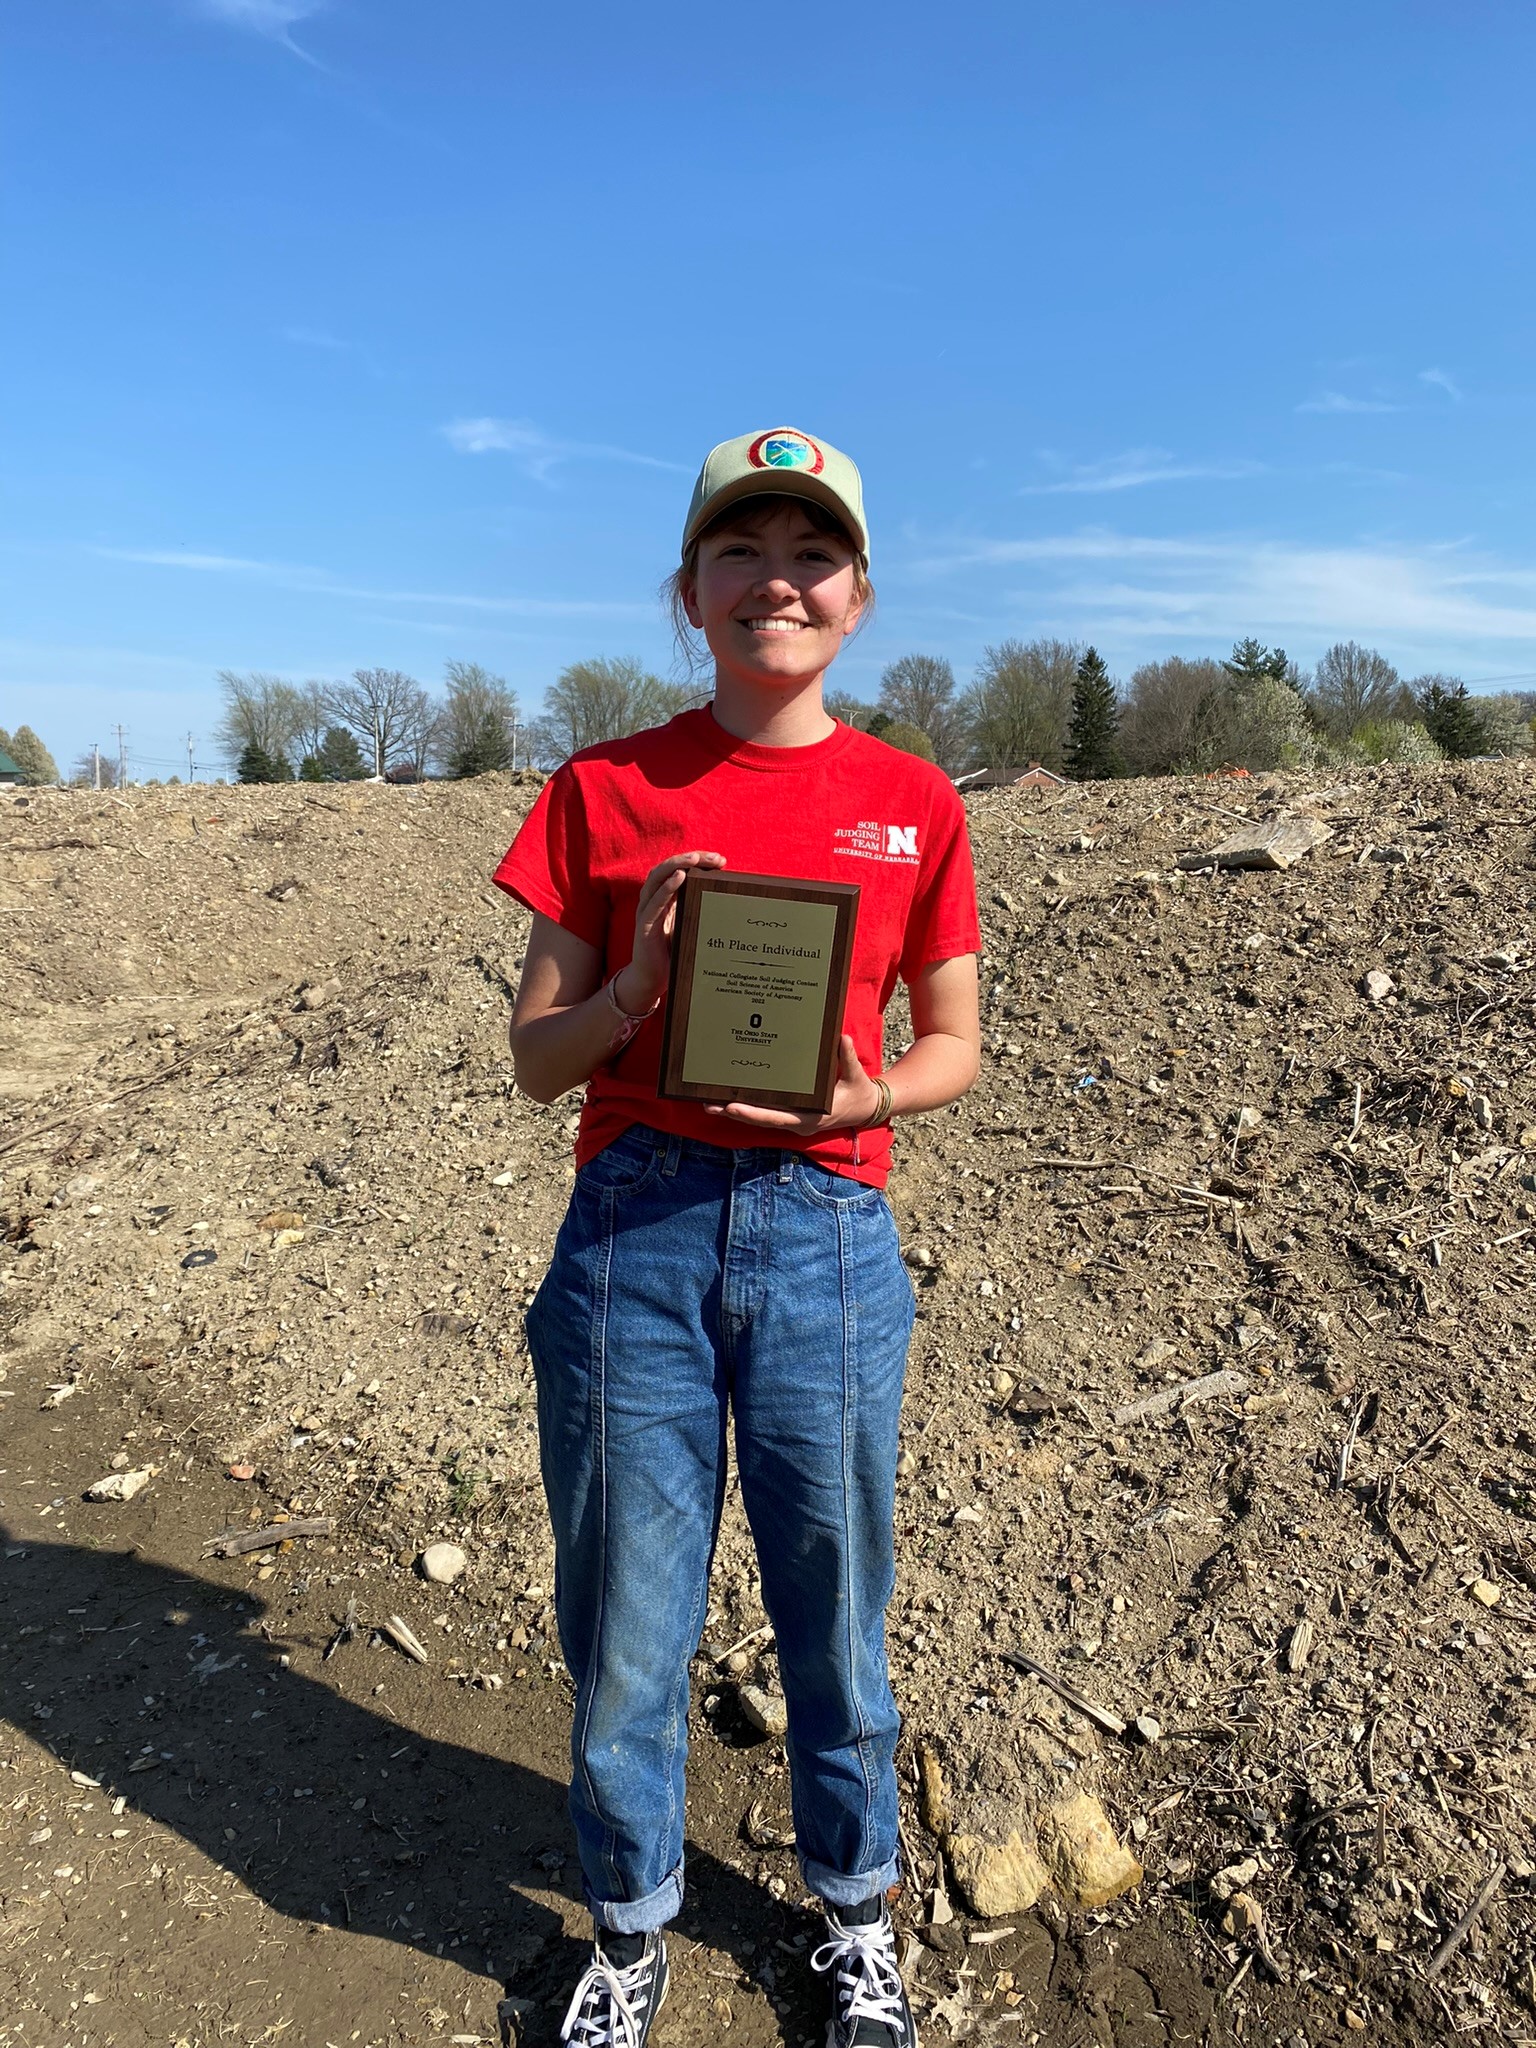 Kennadi Griffis, a third-year environmental science major, with a concentration in soil science and a water science minor finish in 4th place at the 2022 National Soil Judging Contest